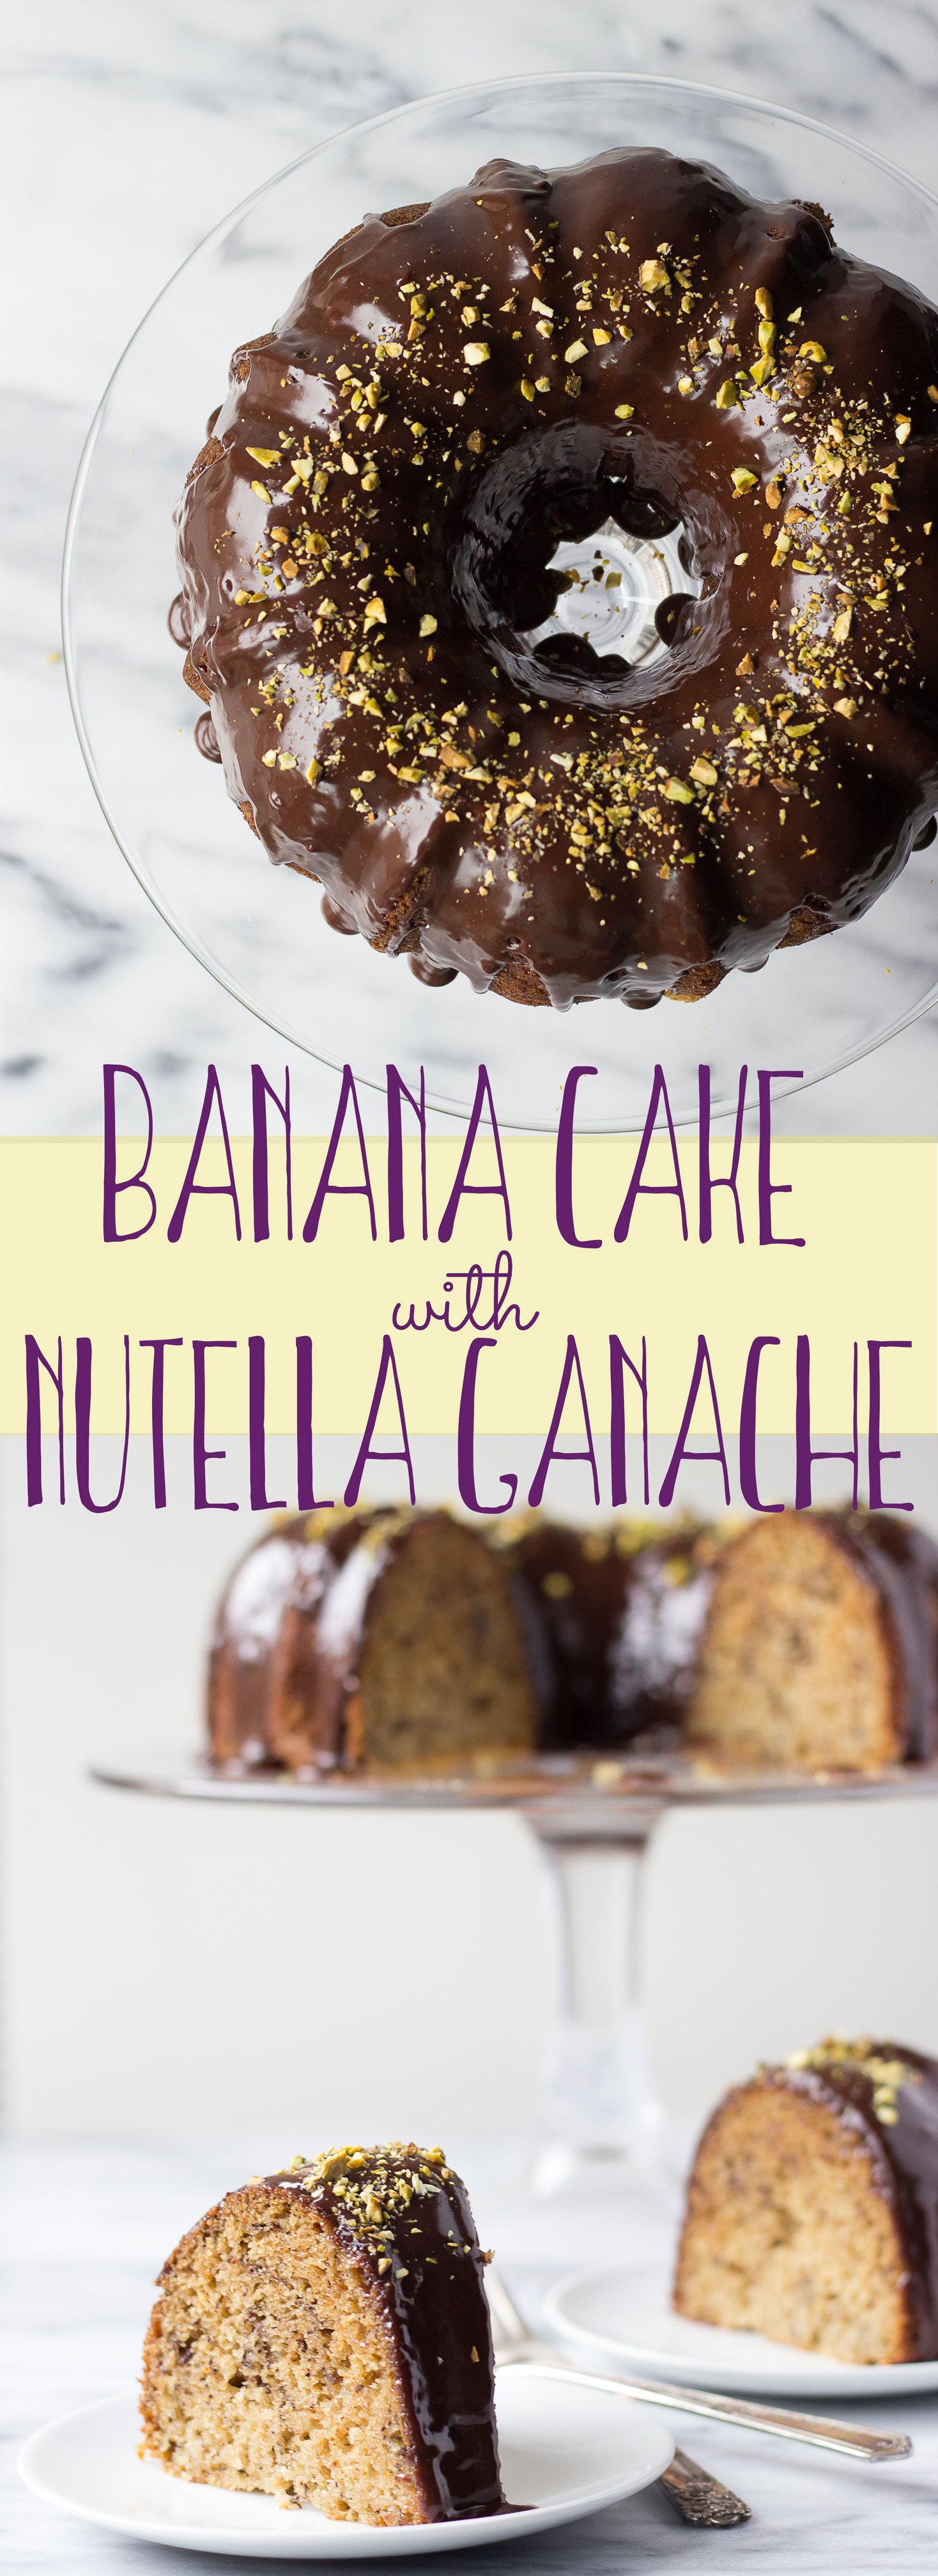 Banana Cake with Nutella Ganache - light, moist banana cake drizzled with a creamy Nutella ganache, it's the perfect dessert any time!